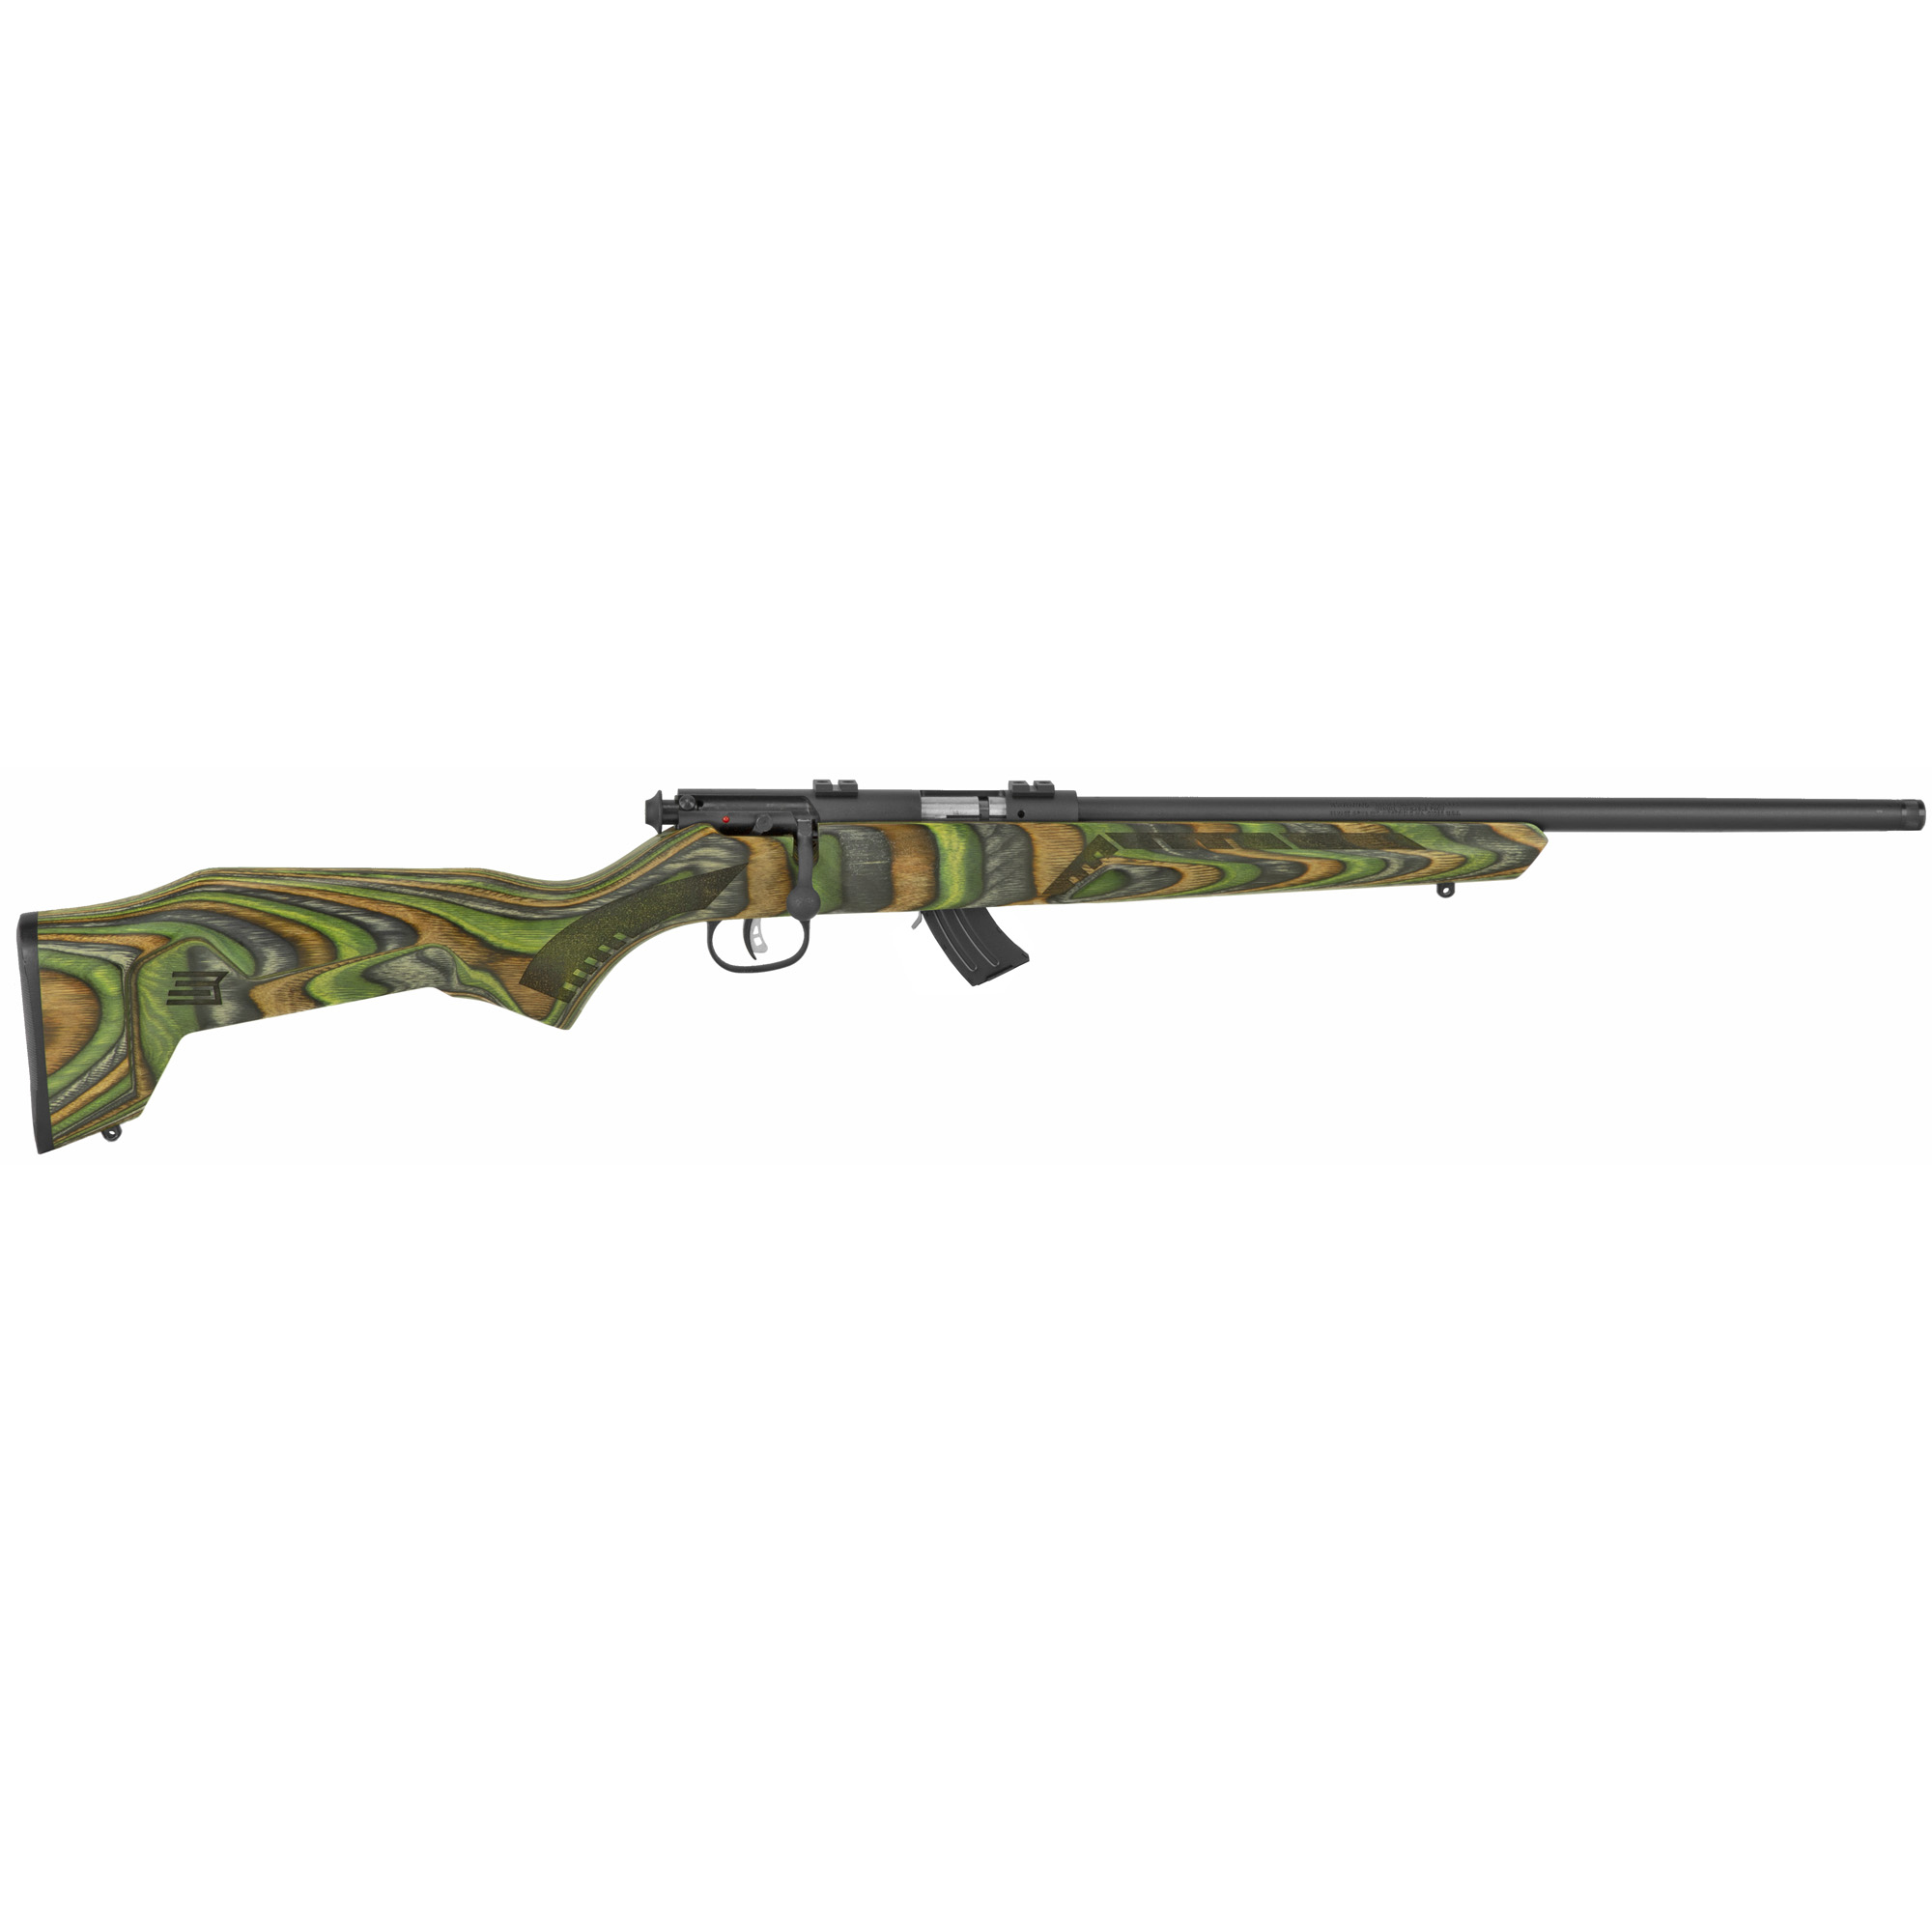 Savage, Mark II, Bolt Action, Rifle, 22LR, 18" Barrel, Green, Laminate Stock, Right Hand, 10Rd, Includes 2-piece Weaver Base and 1-10rd Magazine